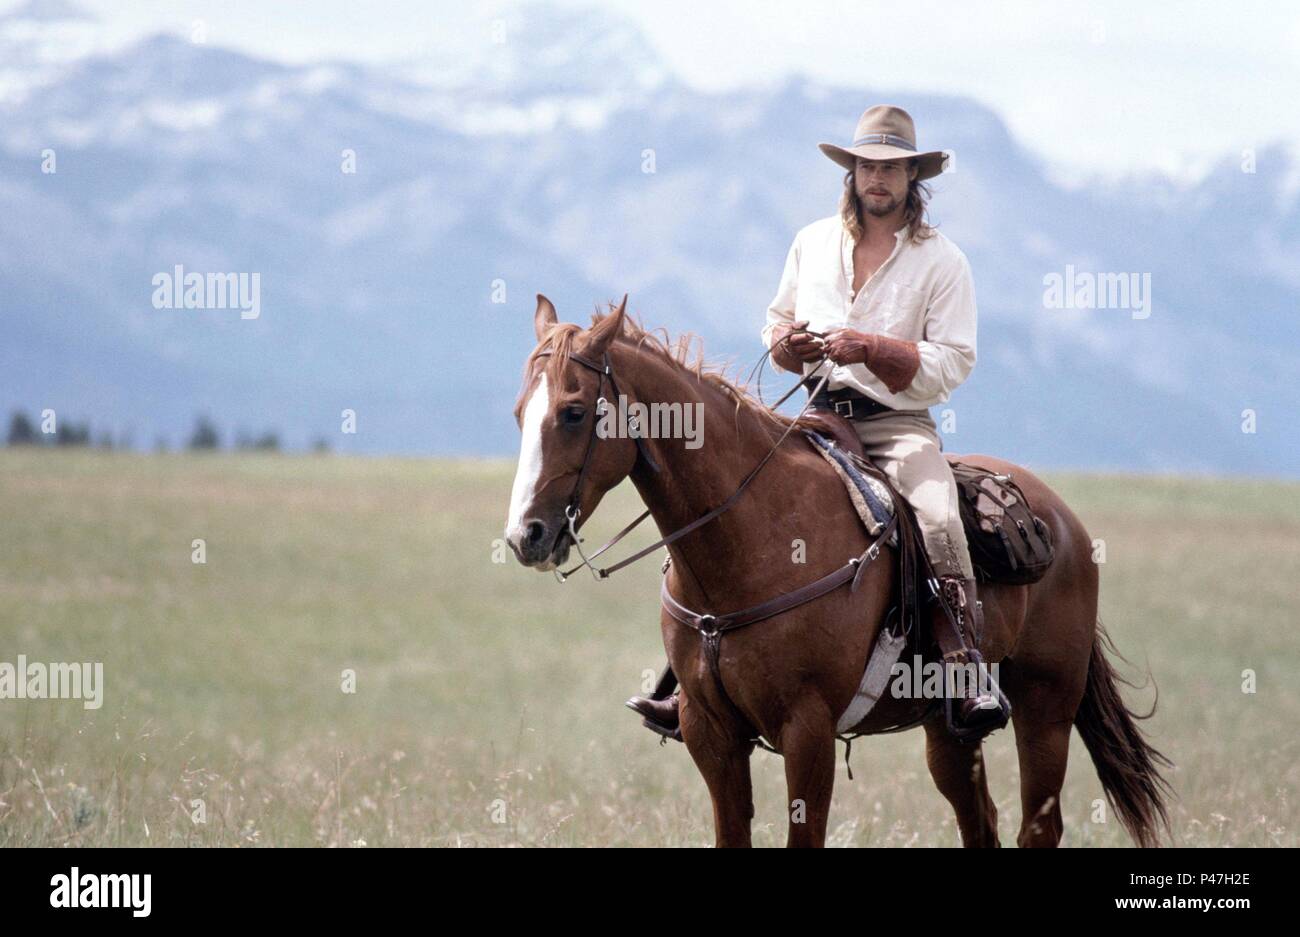 LEGENDS OF THE FALL Stock Photo - Alamy